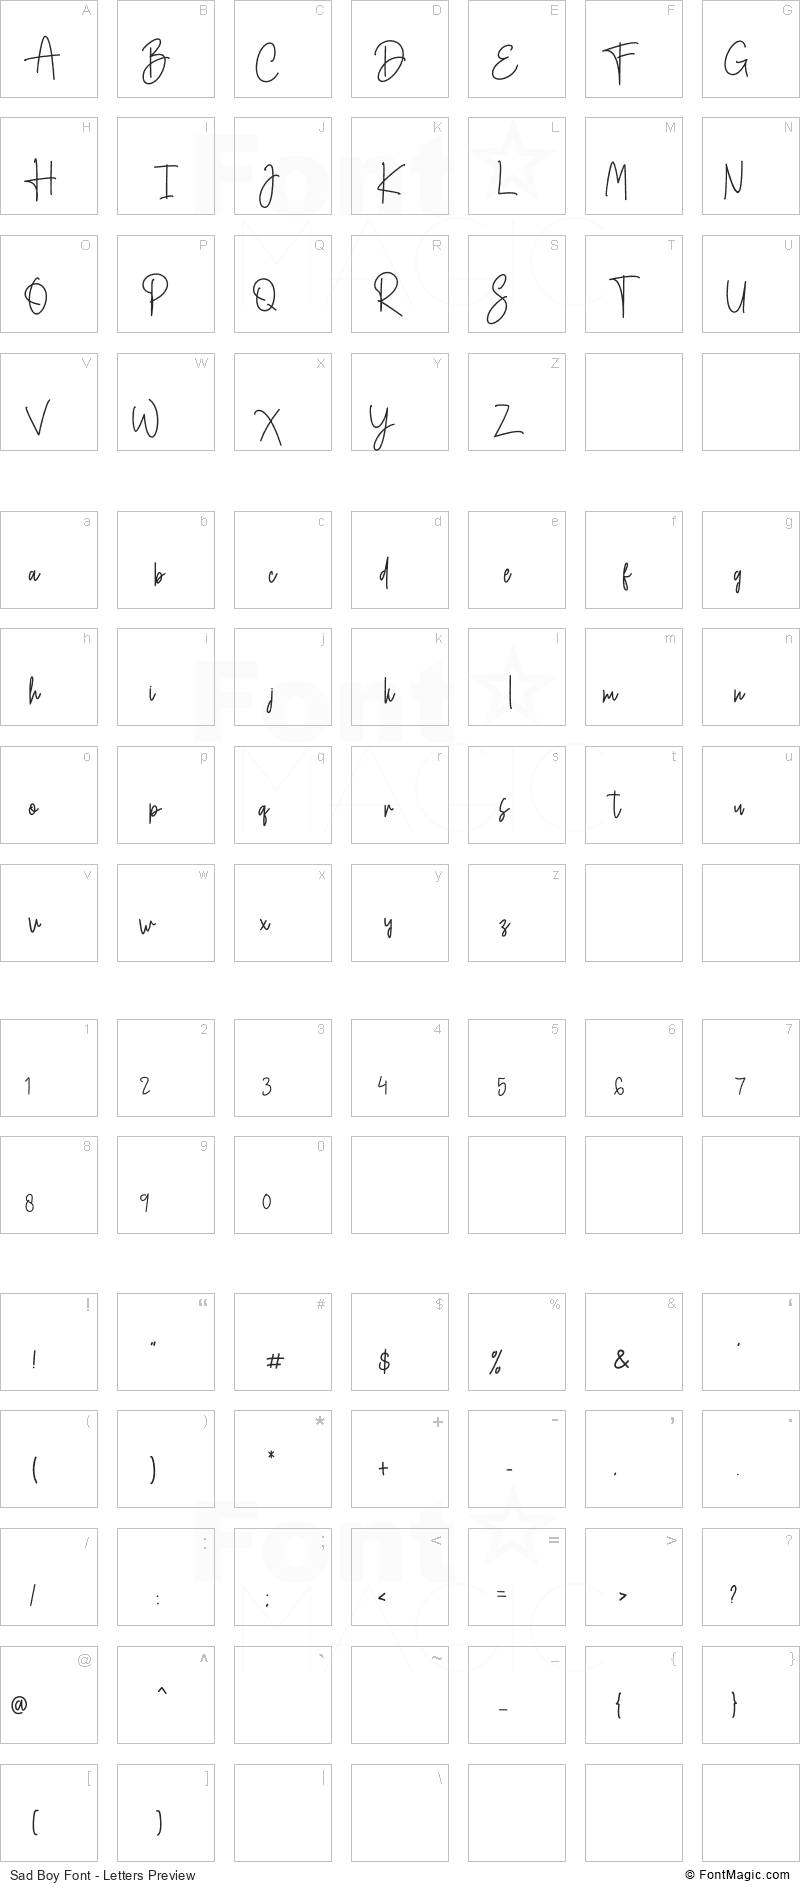 Sad Boy Font - All Latters Preview Chart